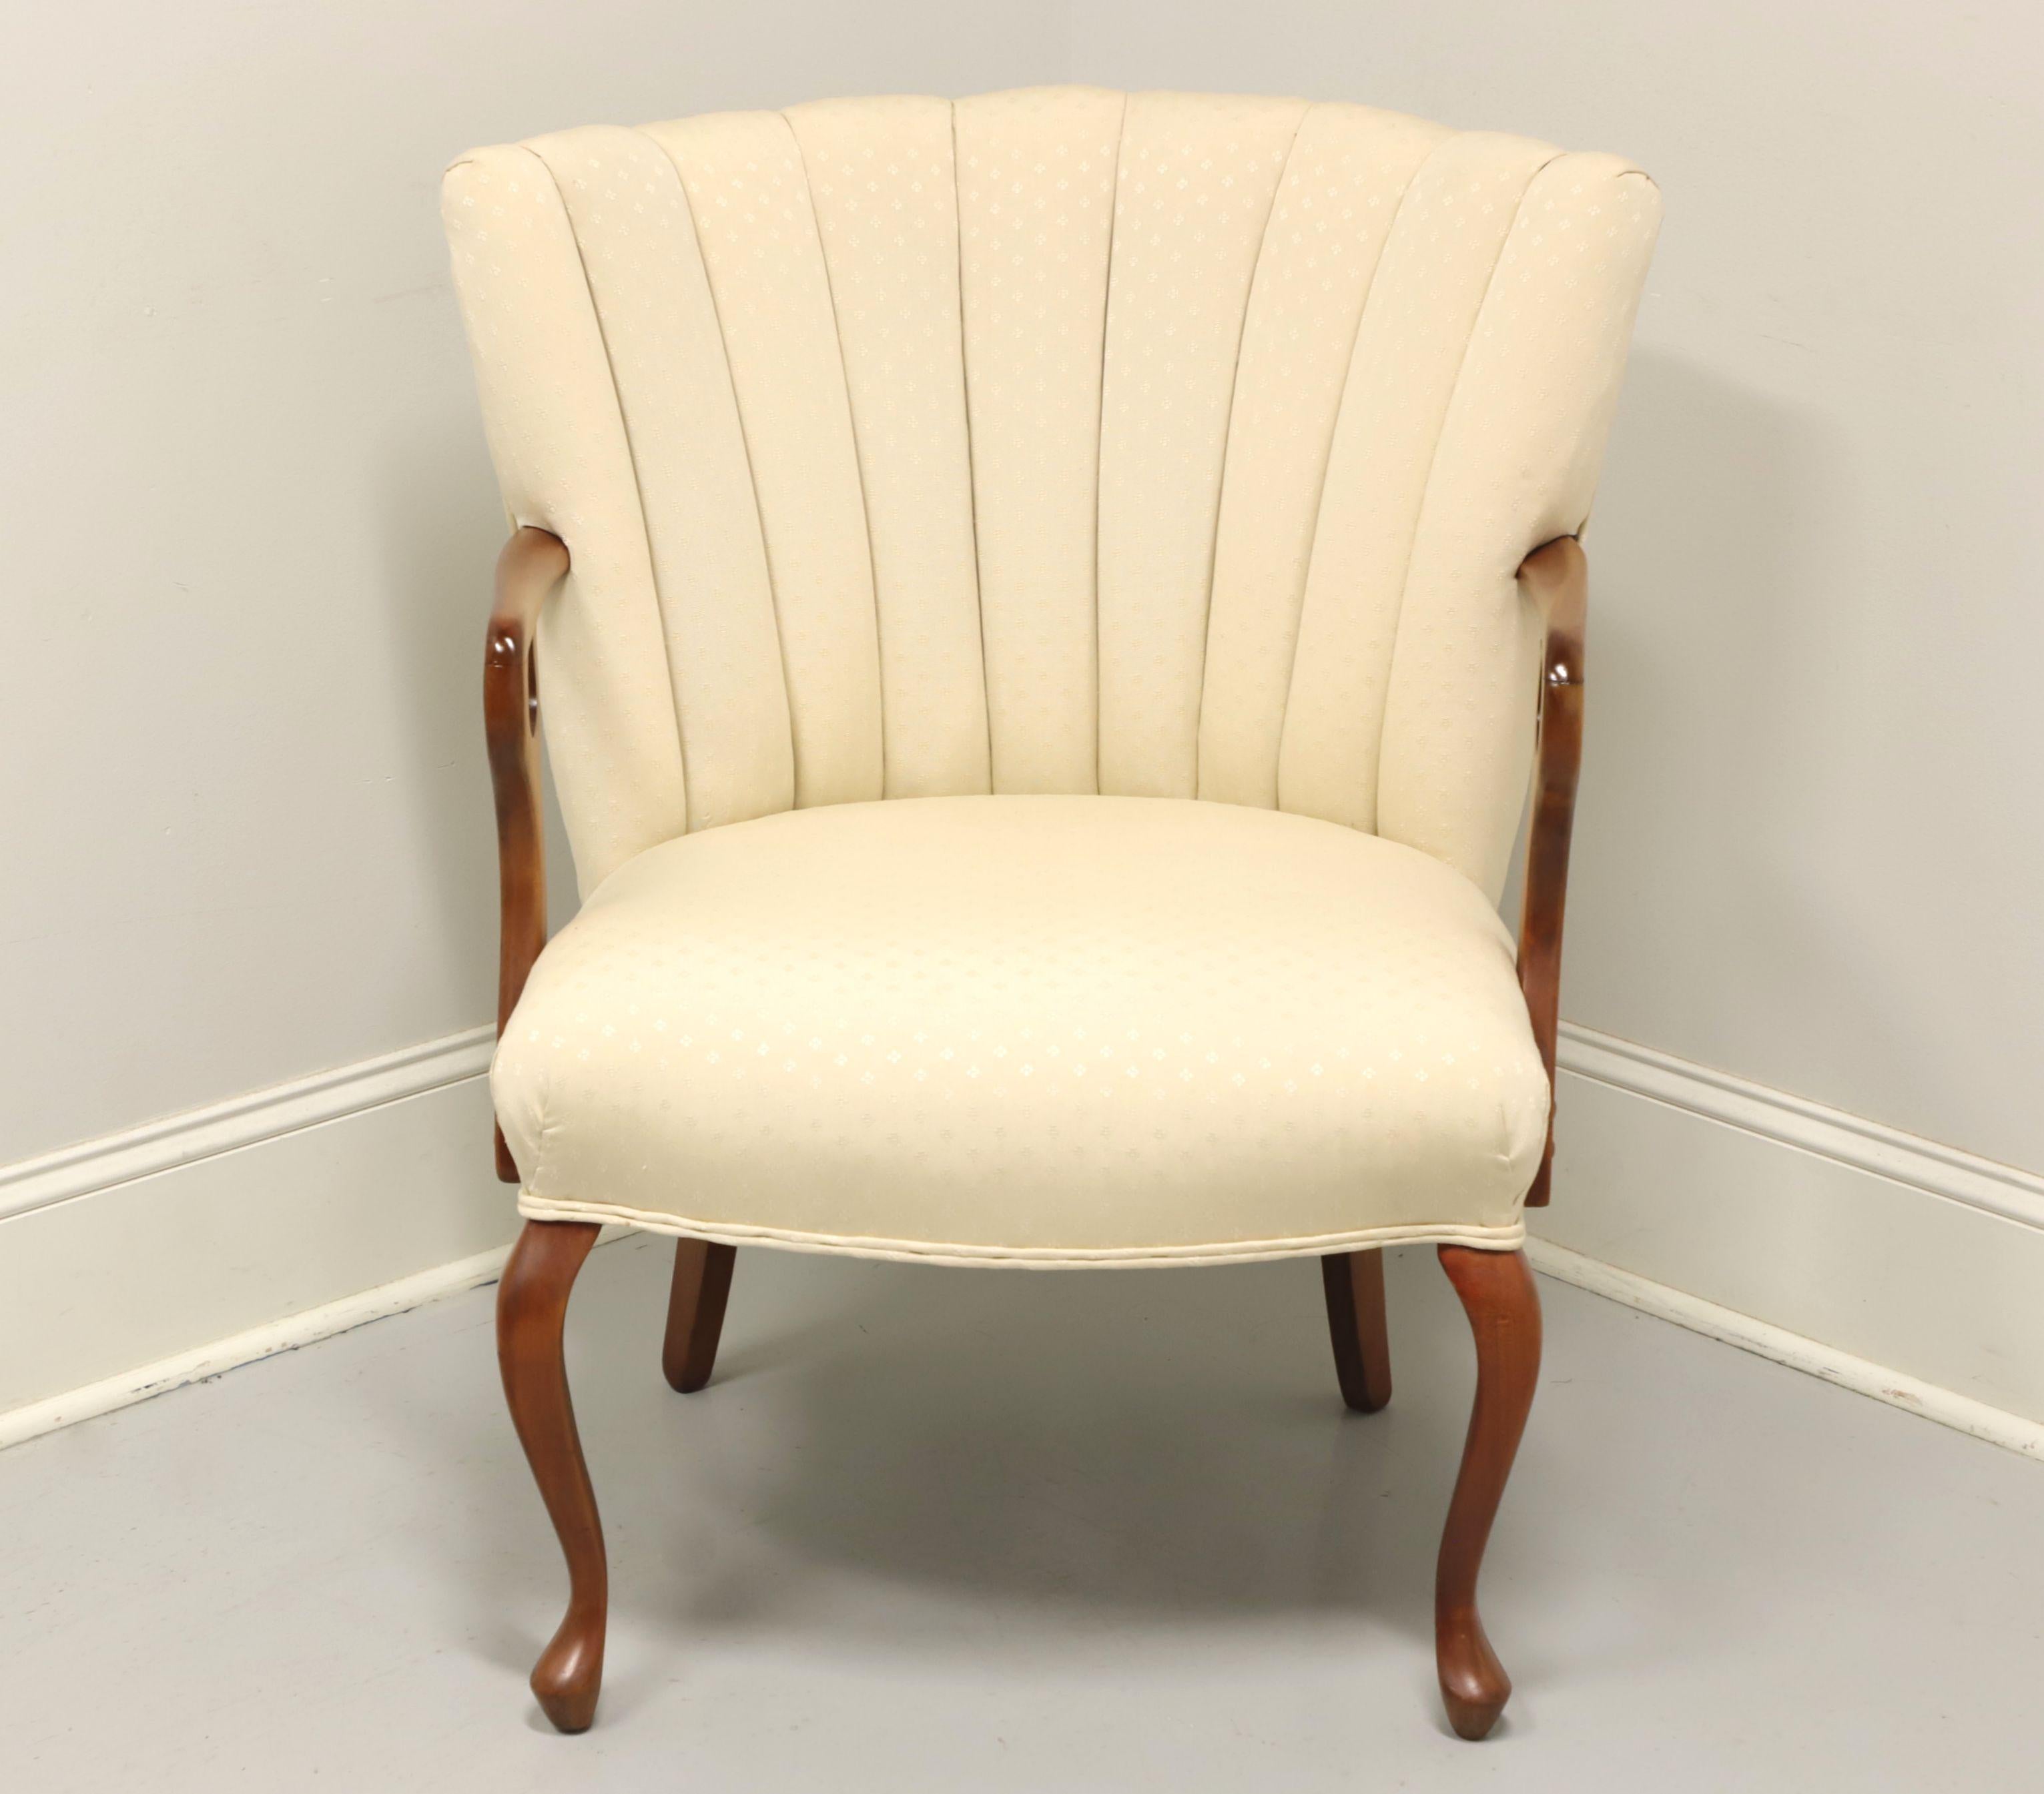 A vintage French Provincial upholstered accent armchair, unbranded. Mahogany frame with rounded arms, channel back and cabriole front legs. Features an upholstered fabric in a neutral cream color. Made in the USA, in the mid 20th Century.